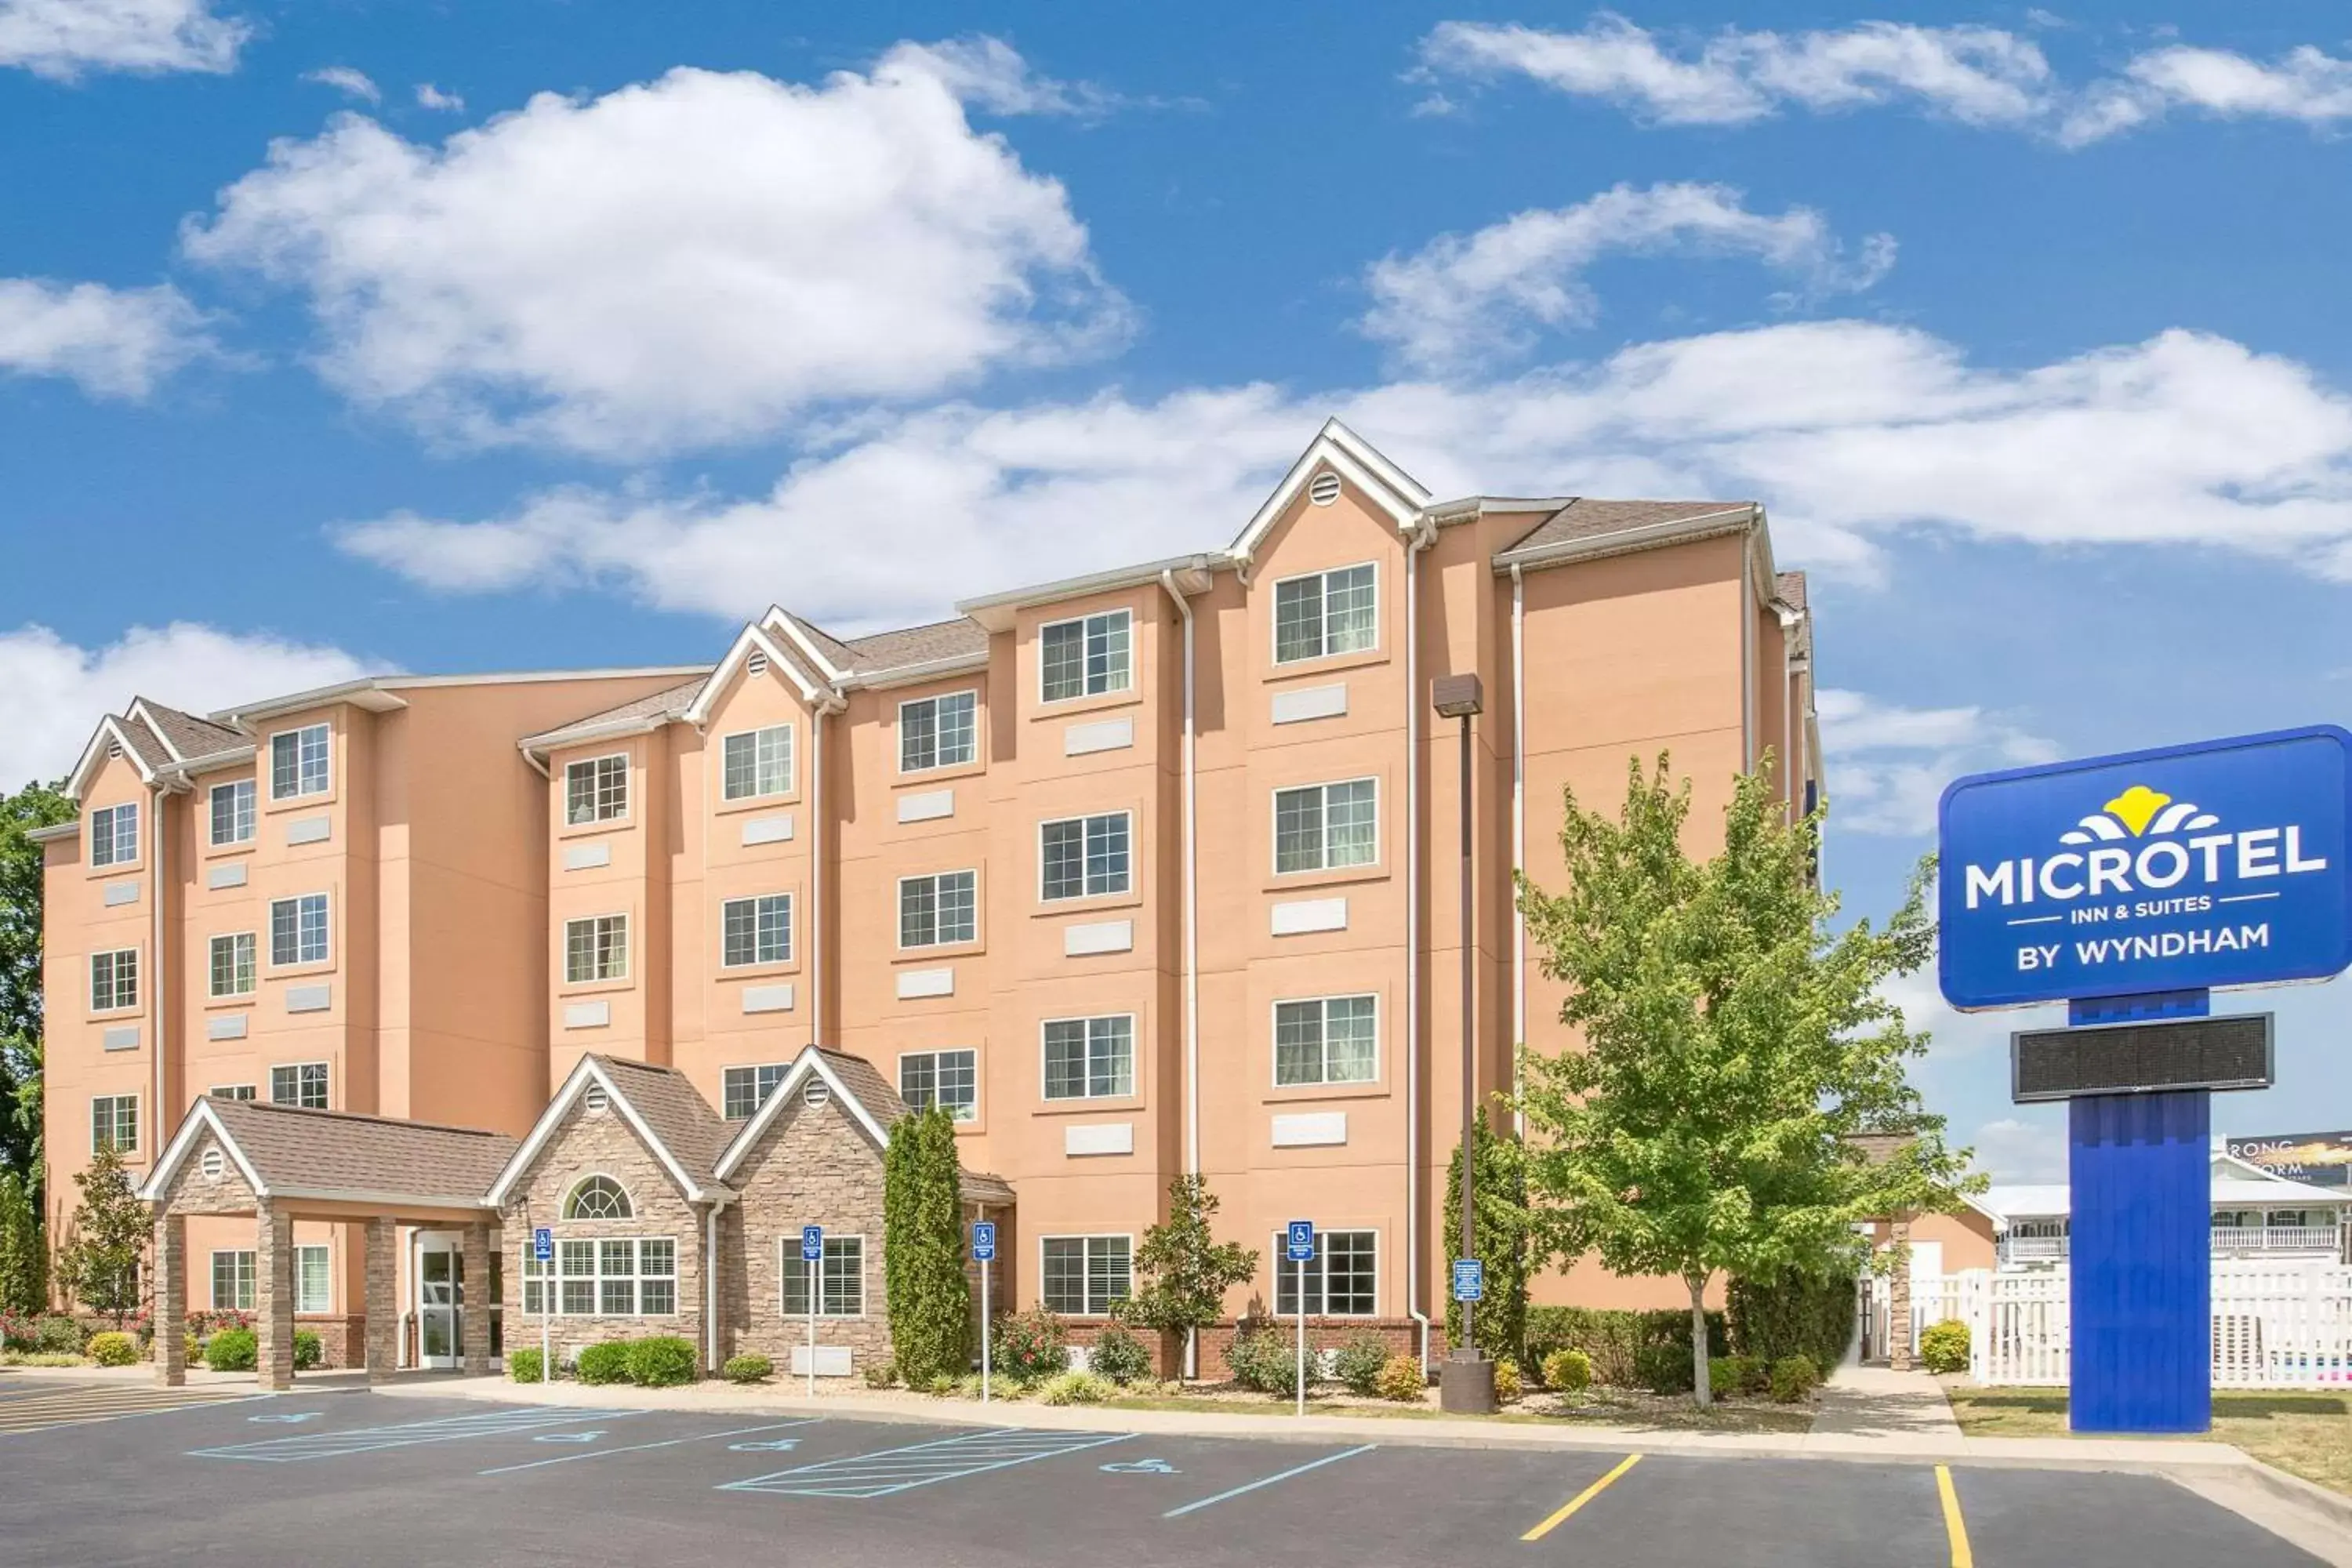 Property building in Microtel Inn & Suites by Wyndham Tuscumbia/Muscle Shoals